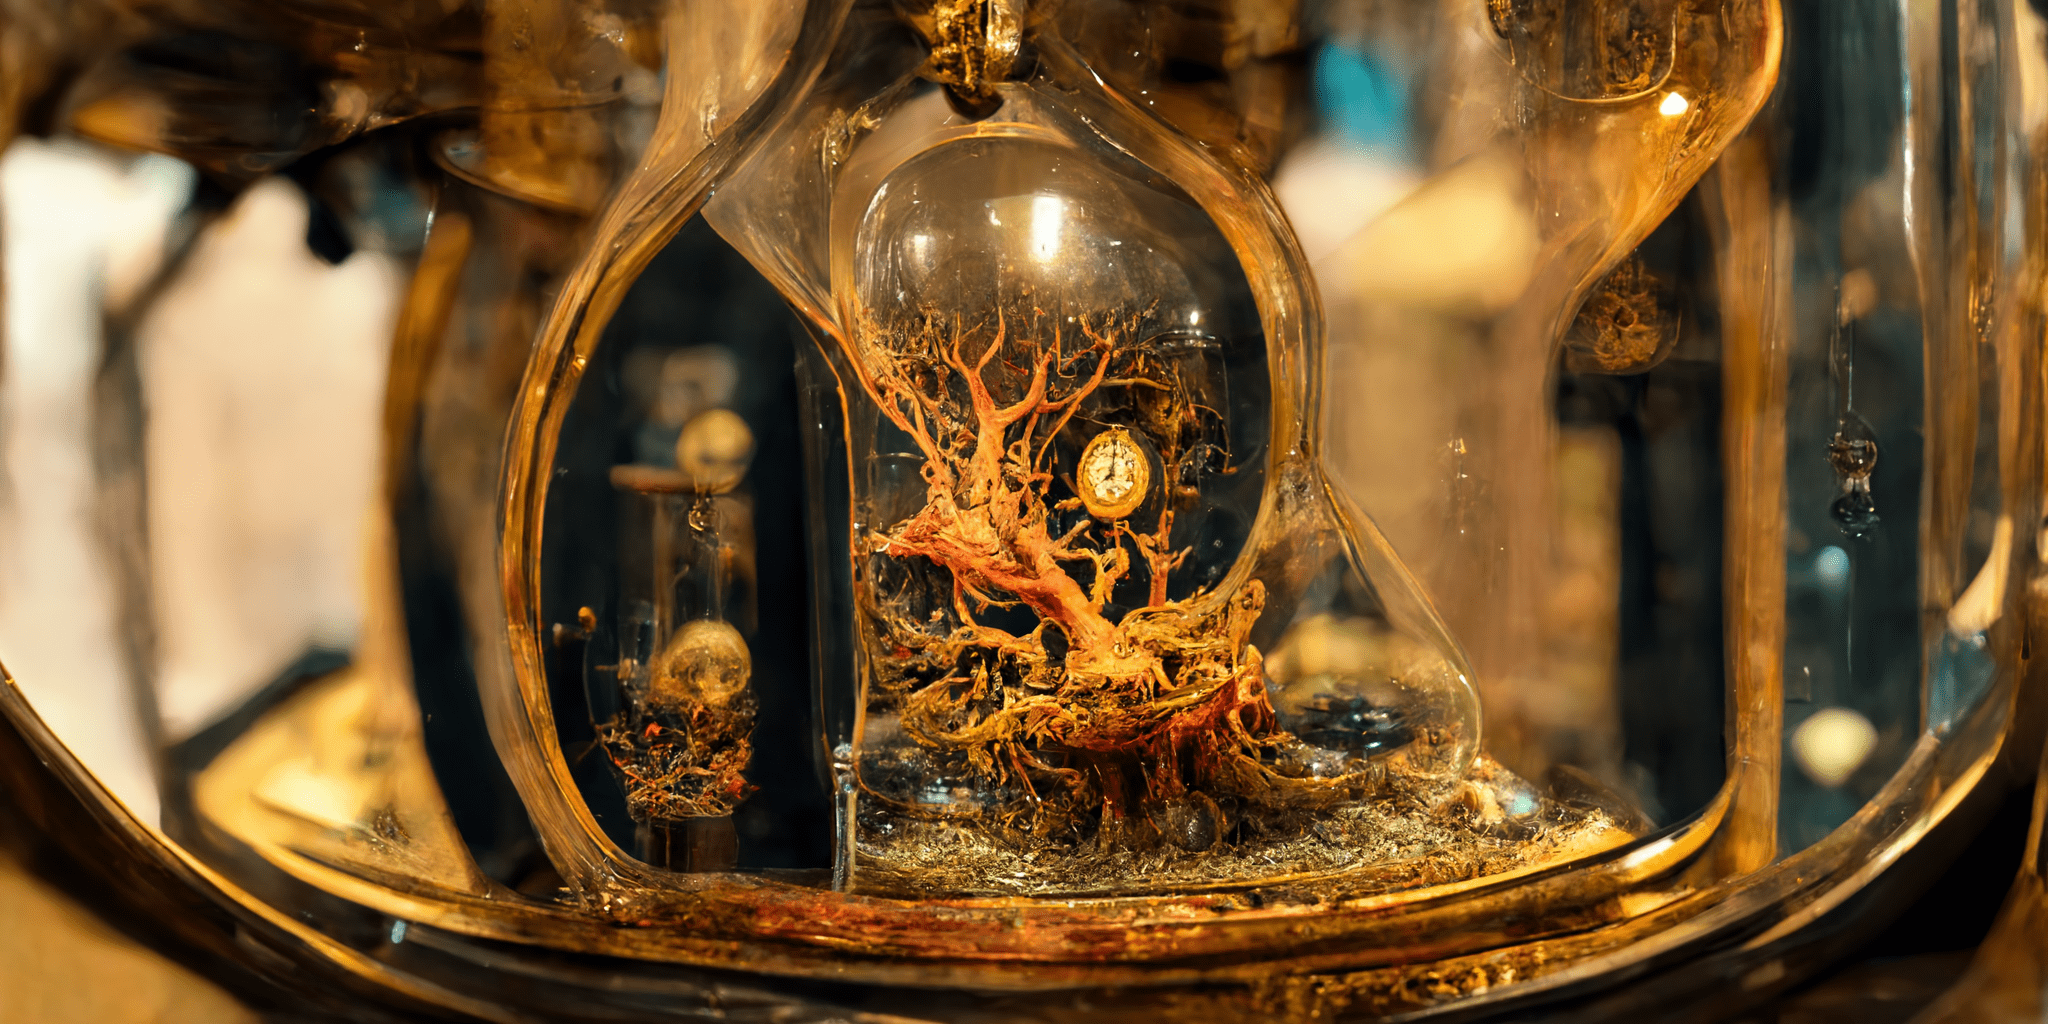 In an hourglass I cannot turn upside down – time for trees